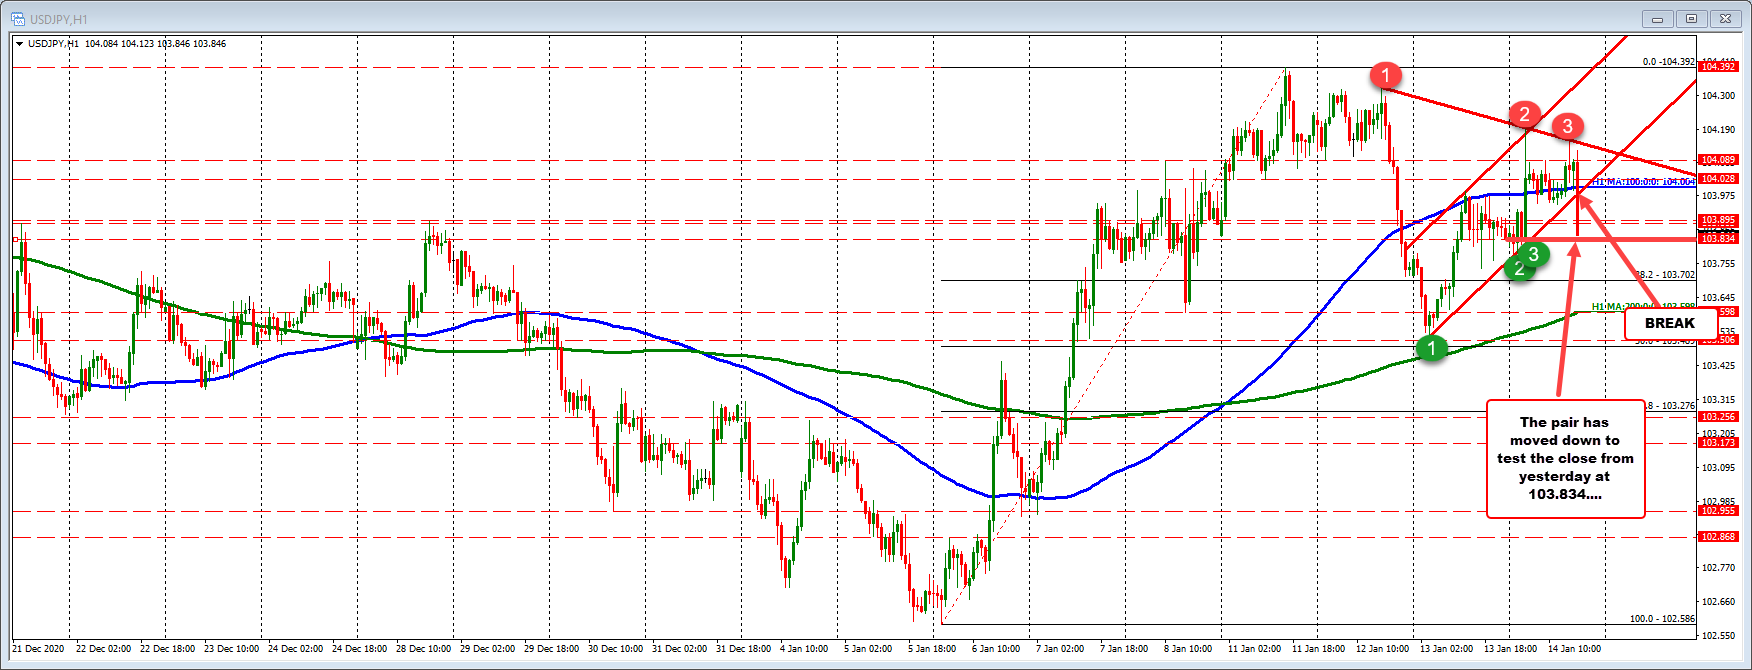 USDJPY moves toward closing level after breaking below trend line/100 hour MA